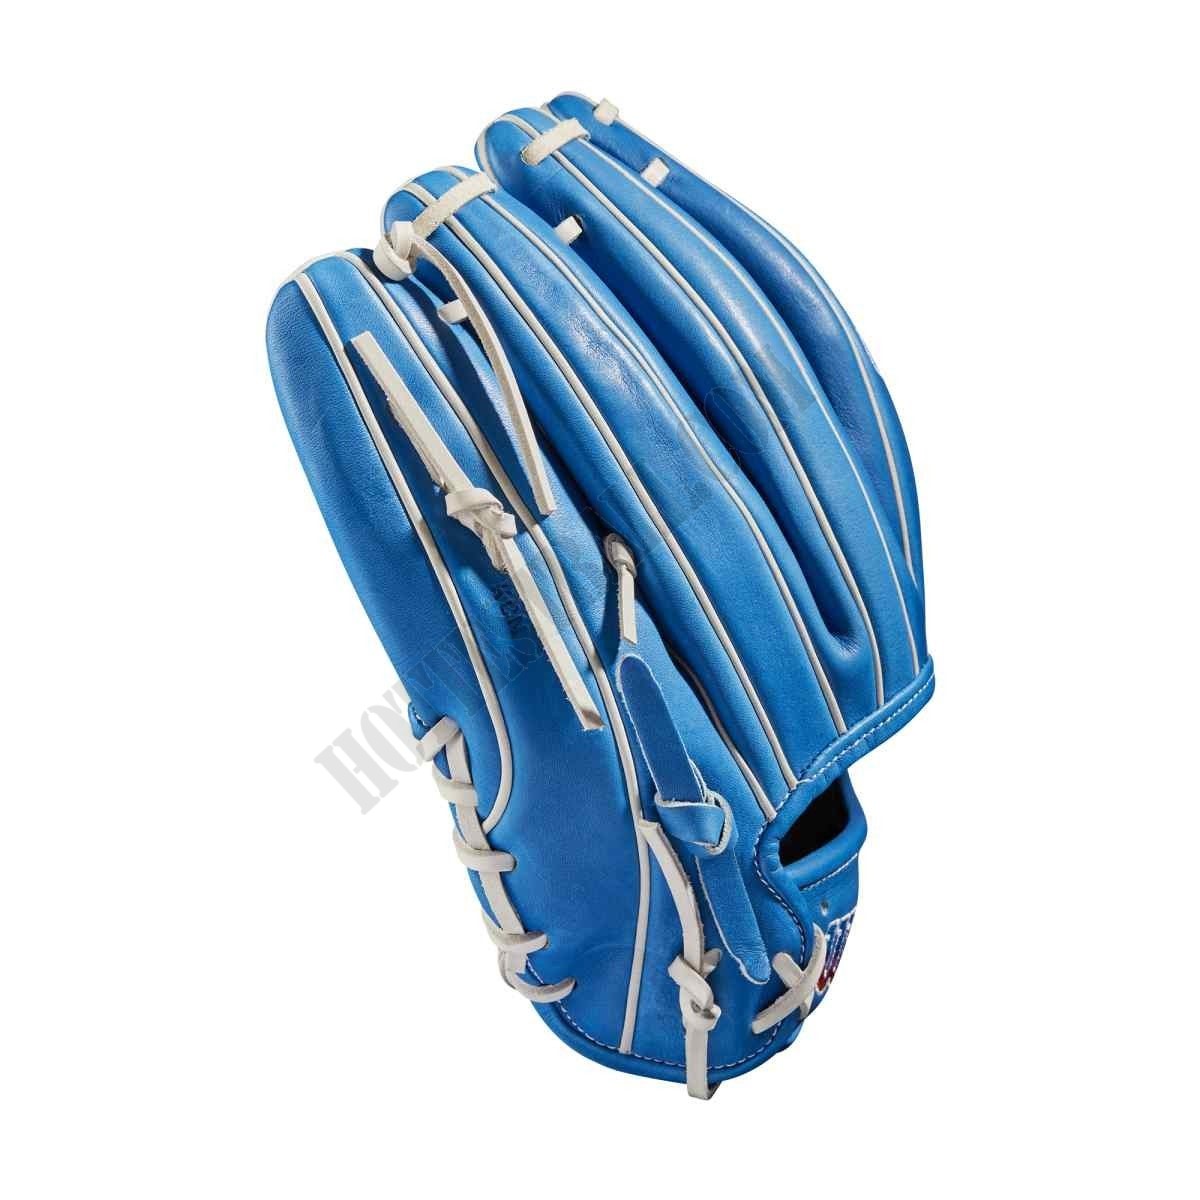 2022 Autism Speaks A2000 1786 11.5" Infield Baseball Glove - Limited Edition ● Wilson Promotions - -4